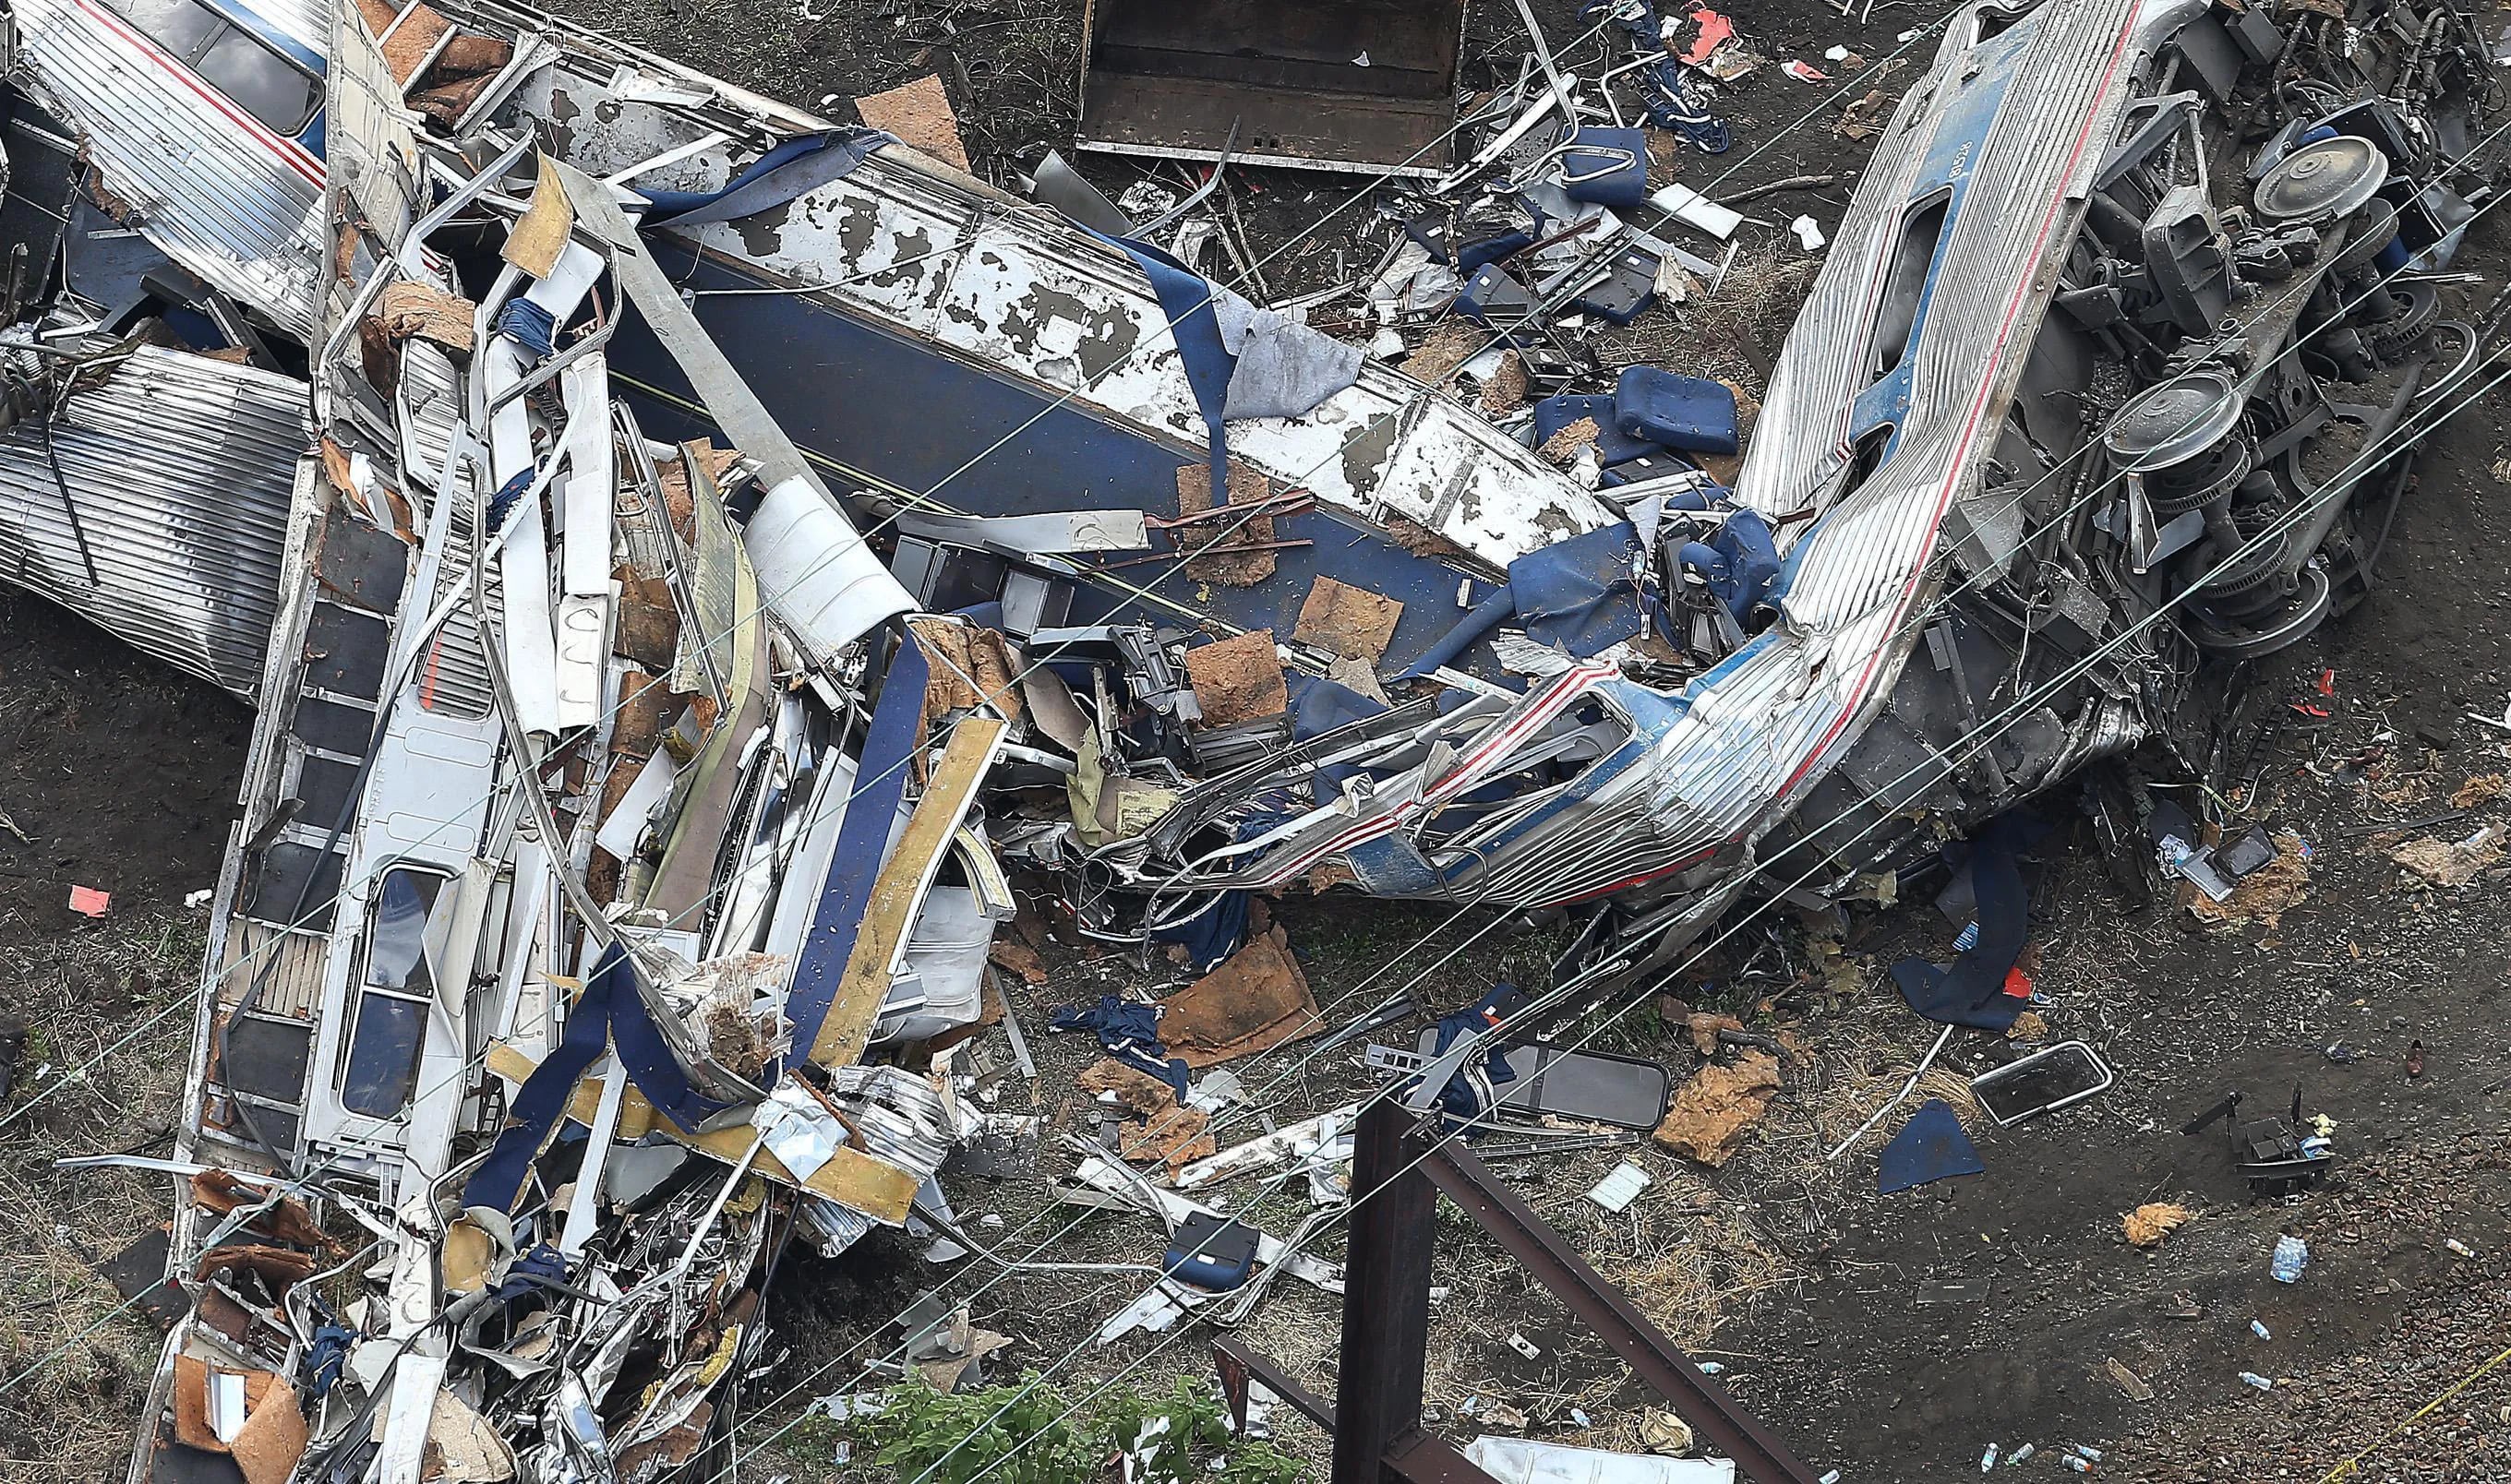 The remains of one of the rail cars from Amtrak train 188 derailment rest at the scene in the Port Richmond section of Philadelphia in May 2015.